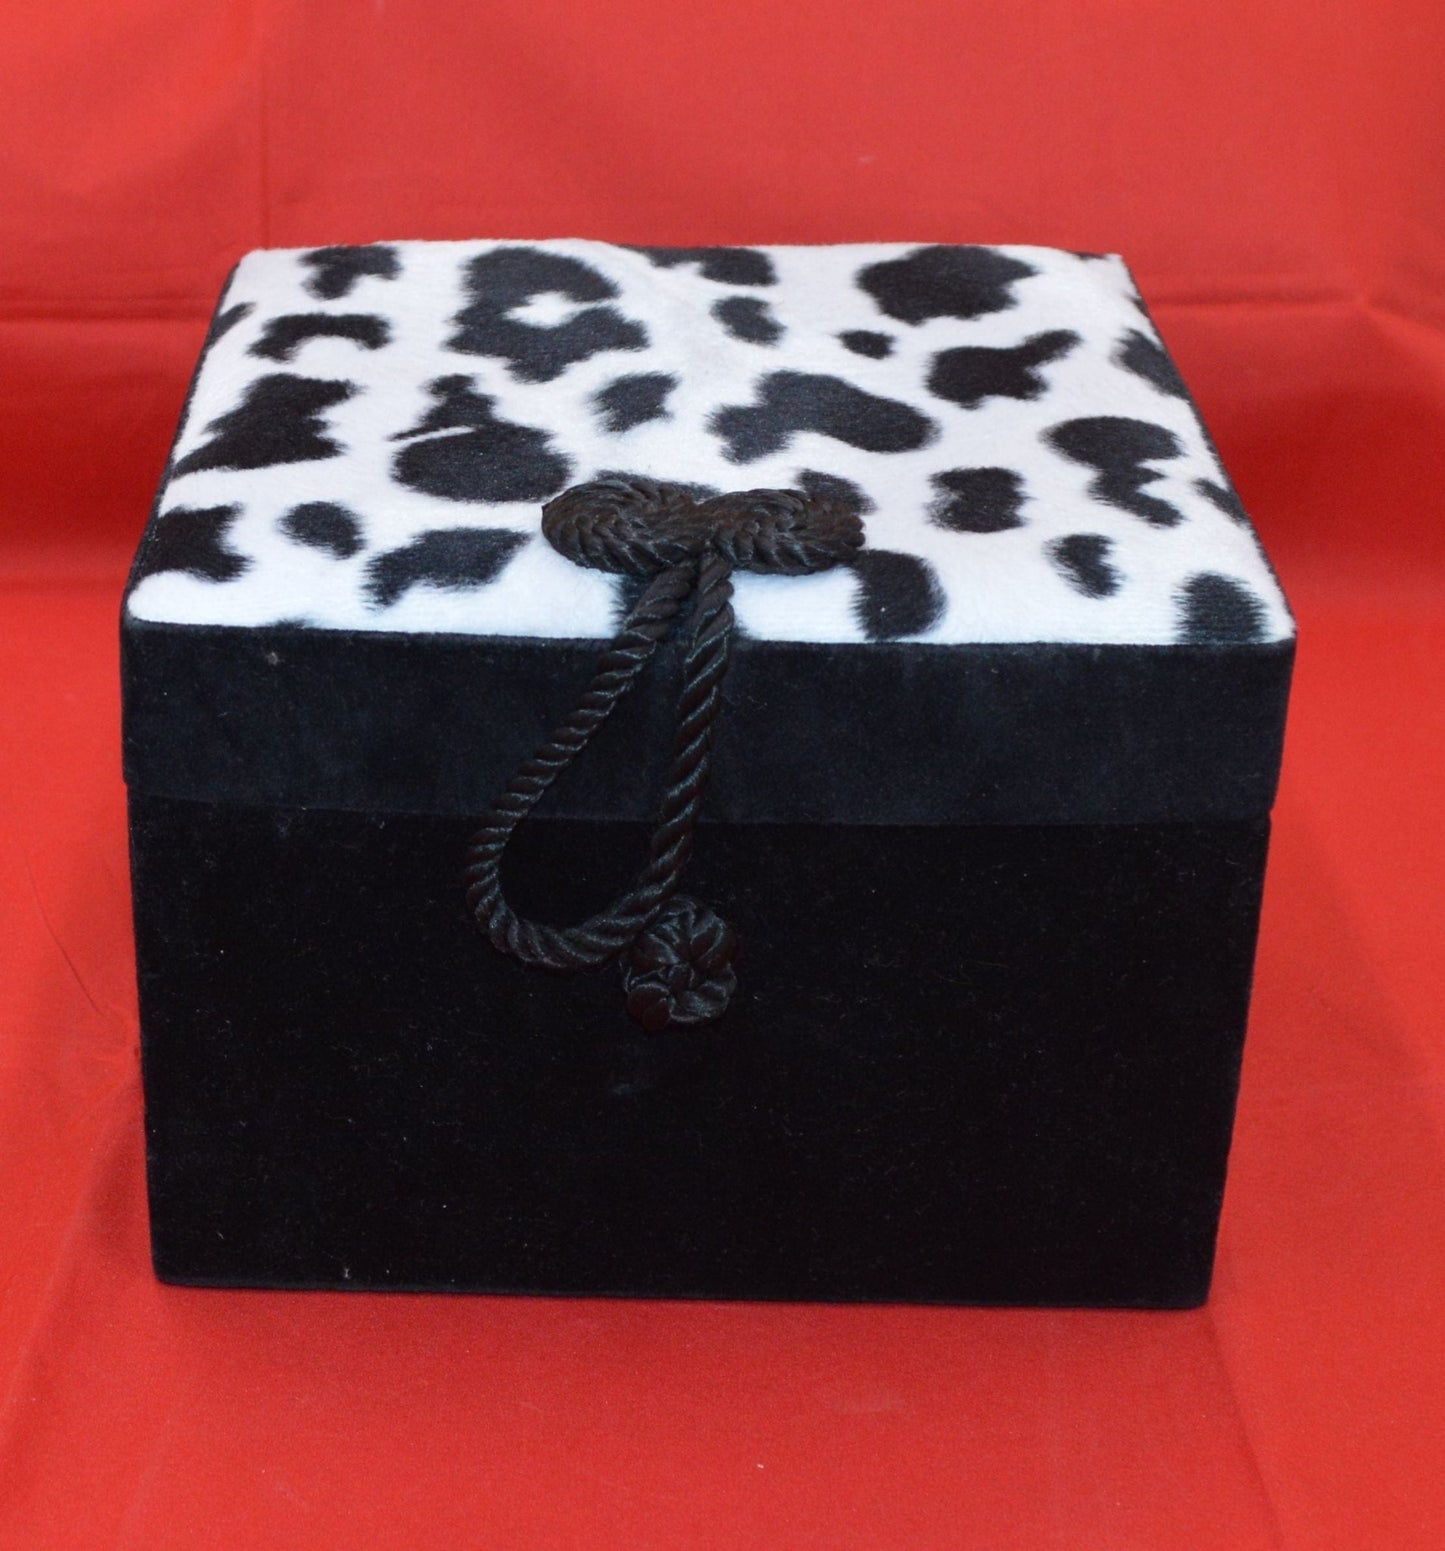 BLACK AND WHITE KEEPSAKE/JEWELLERY BOX(PREVIOUSLY OWNED) GOOD CONDITION - TMD167207